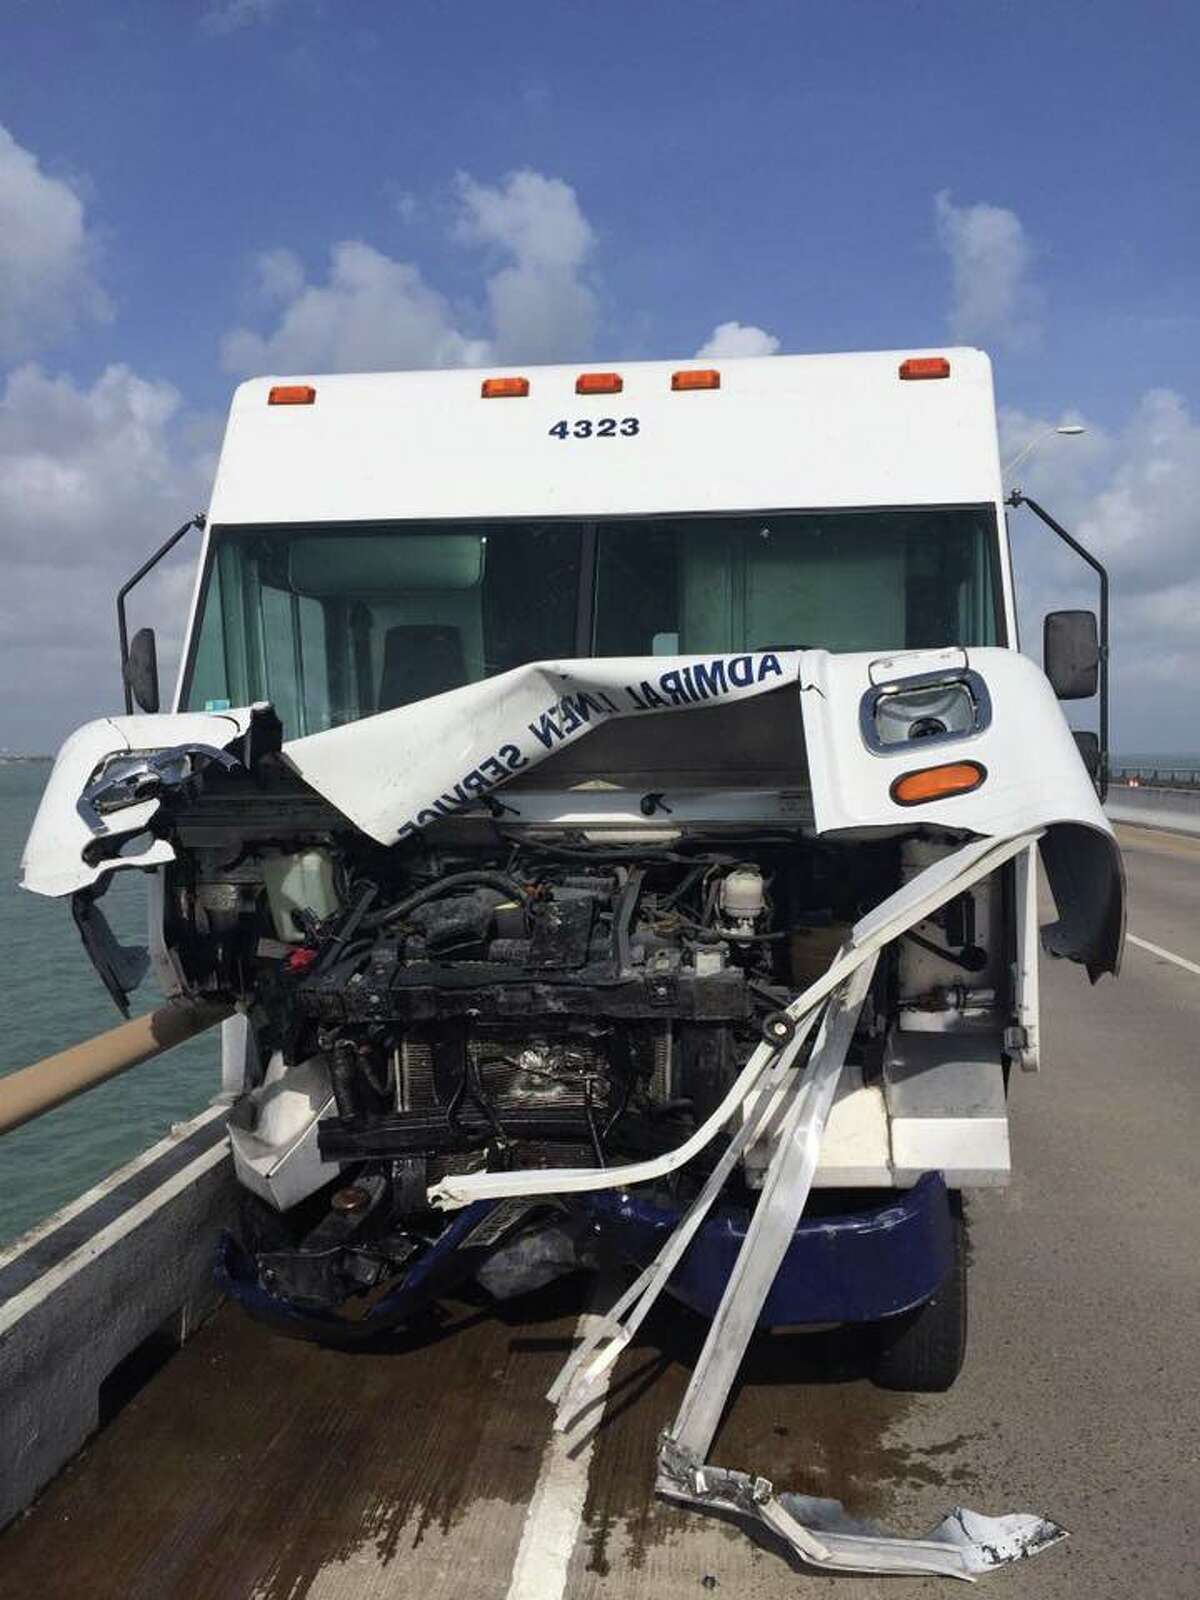 A woman died August 19, 2016 after the grey Mercedes-Benz she was traveling was rear-ended by a linen service truck on the Queen Isabella Memorial Causeway in South Padre Island.